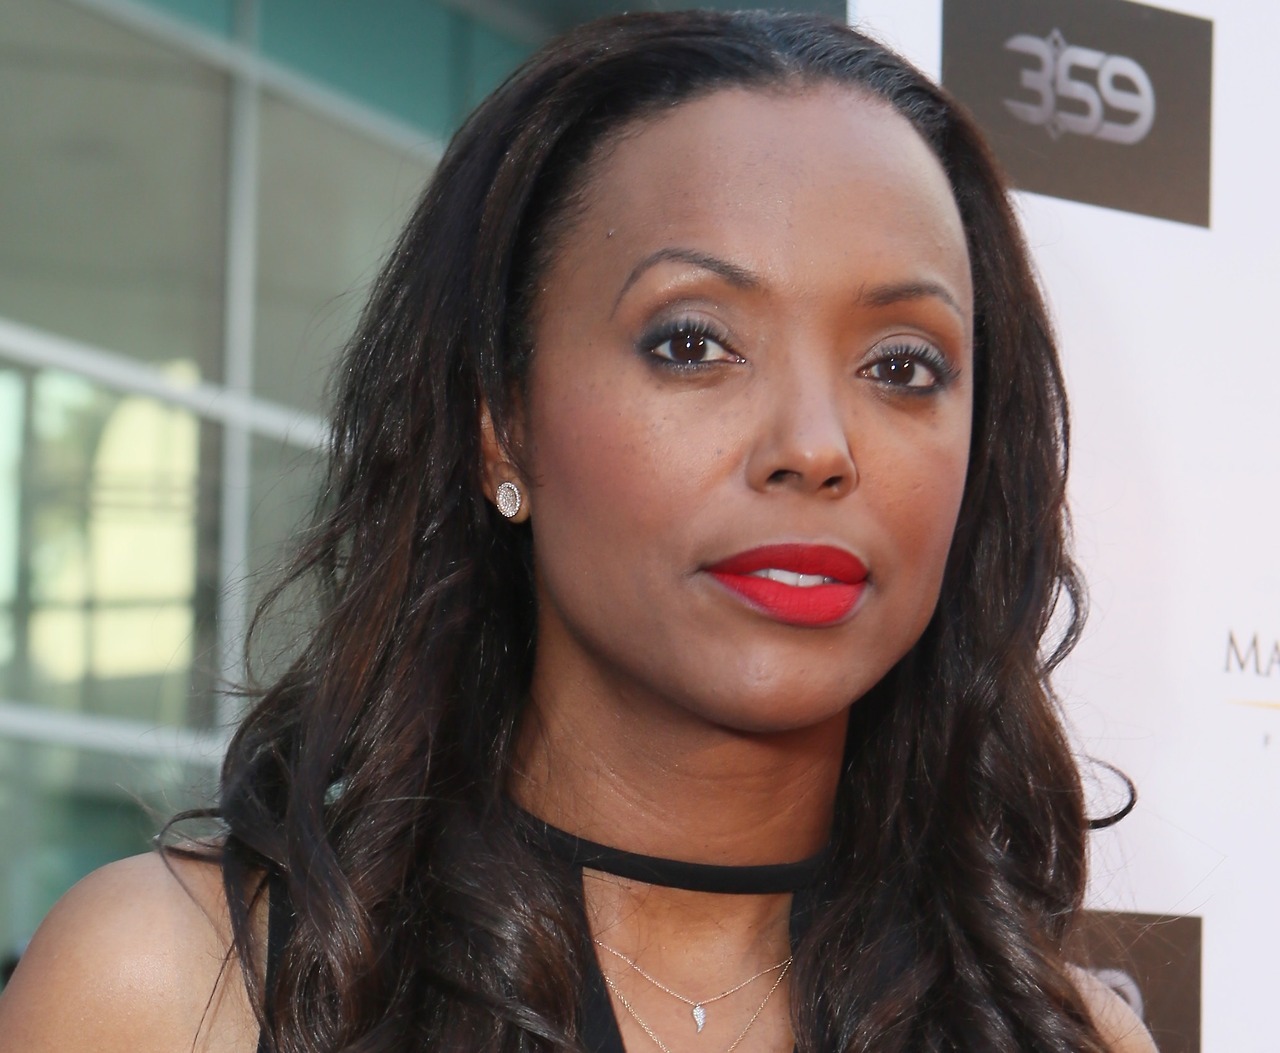 Nude pics of aisha tyler - Porn pictures